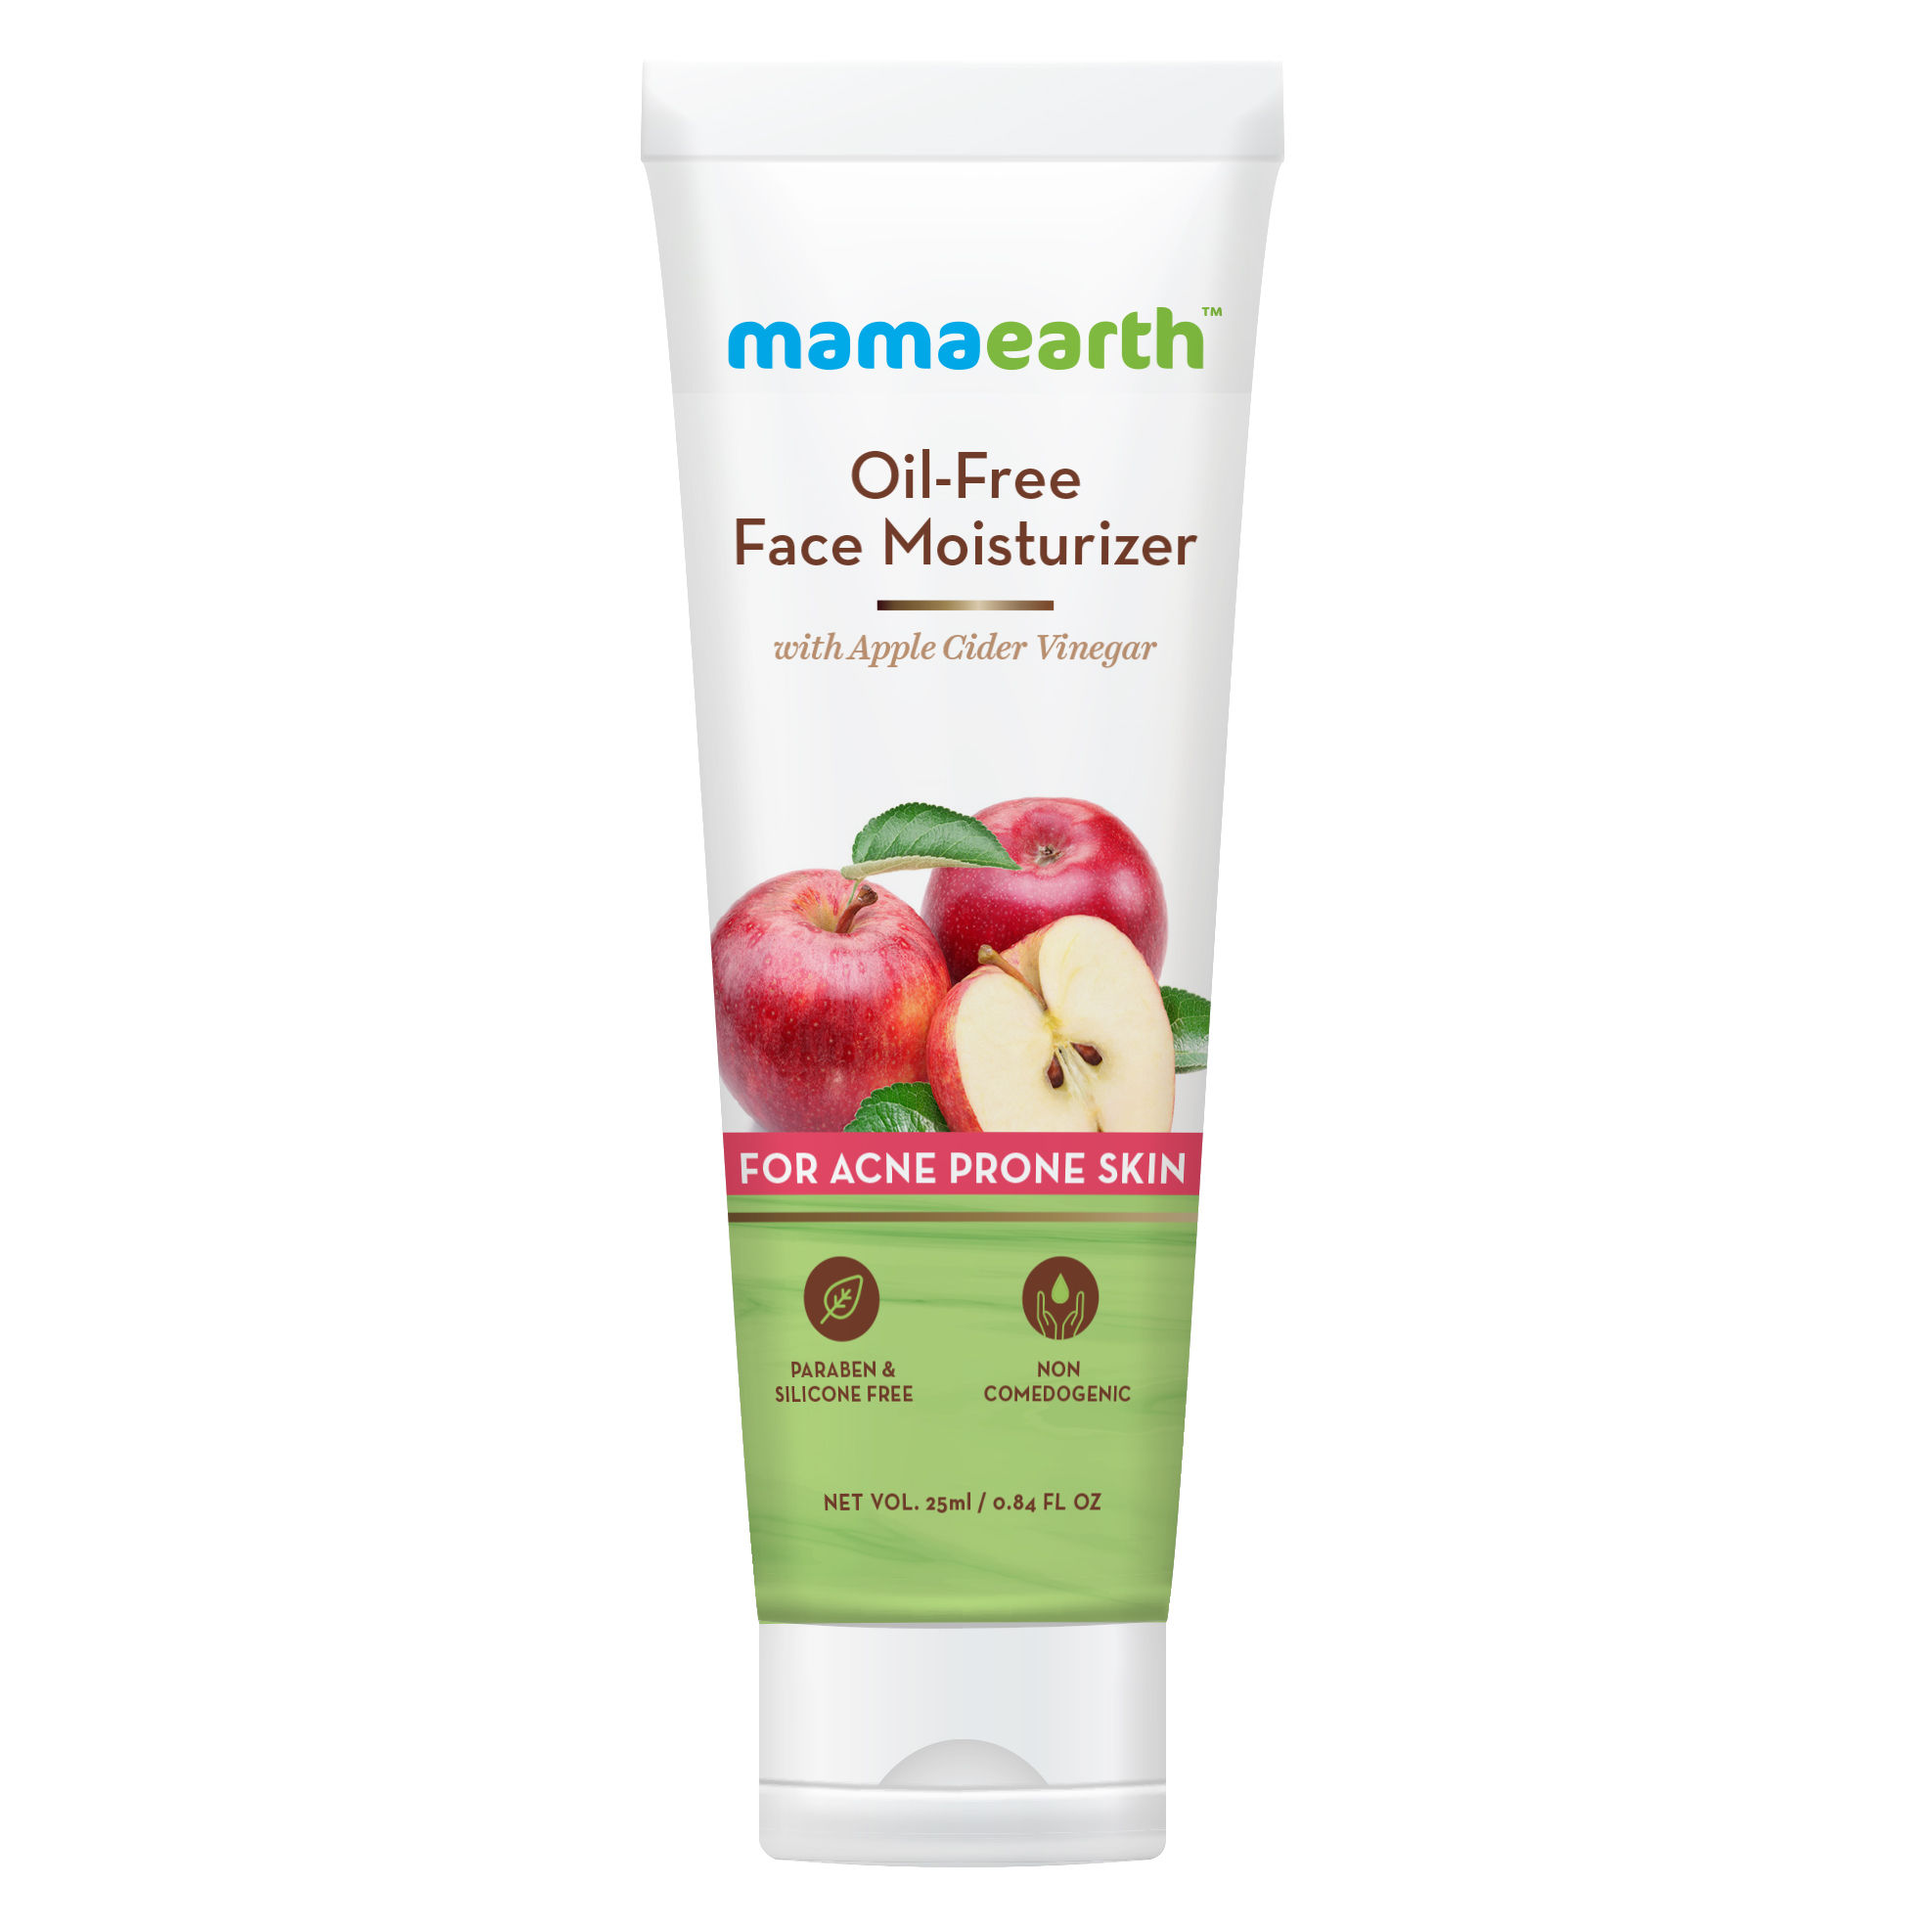 mamaearth free products